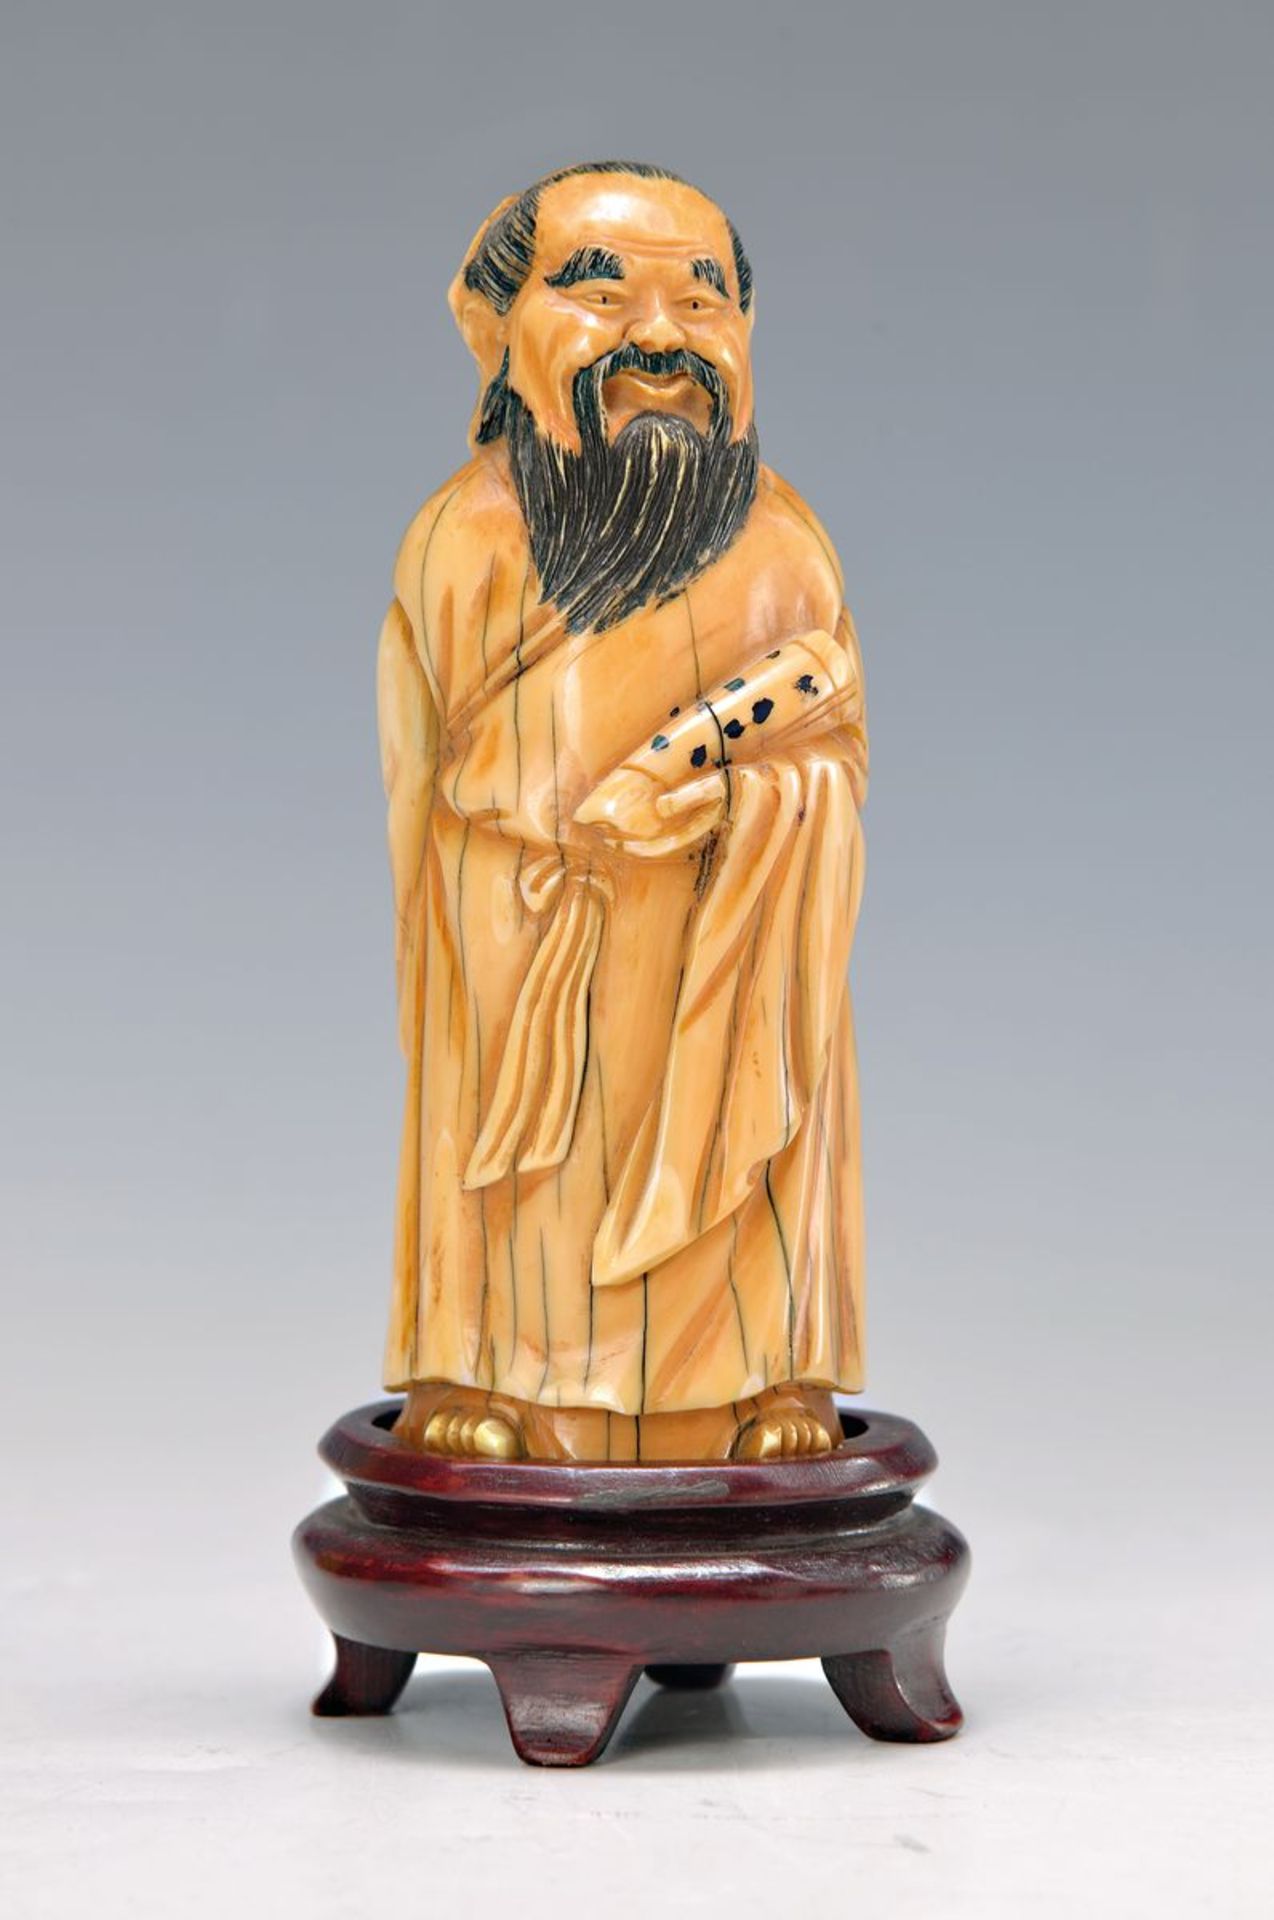 ivory sculpture, China, around 1900/10, talisman with scroll, carved, on wooden pedestal, with